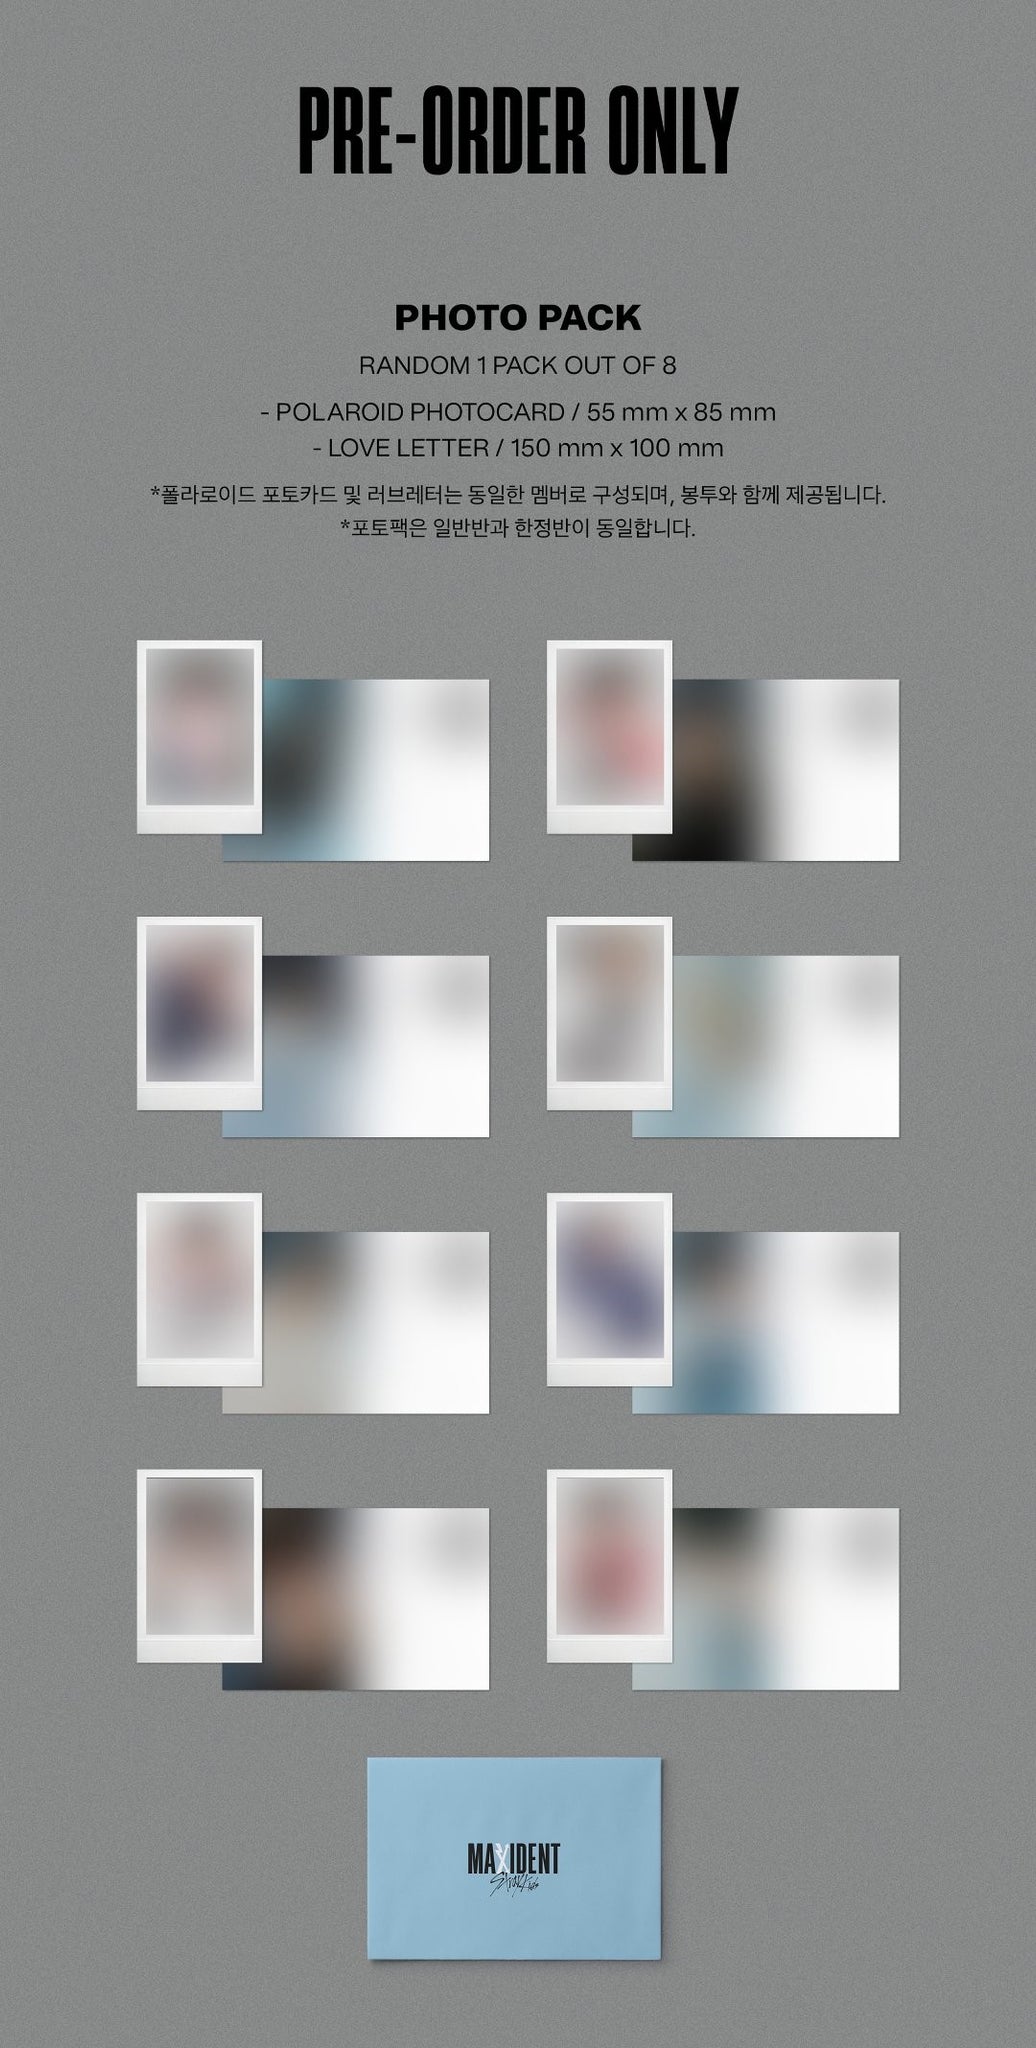 Stray Kids MAXIDENT Standard Pre-order Inclusions Photo Pack Polaroid Photocard Love Letter